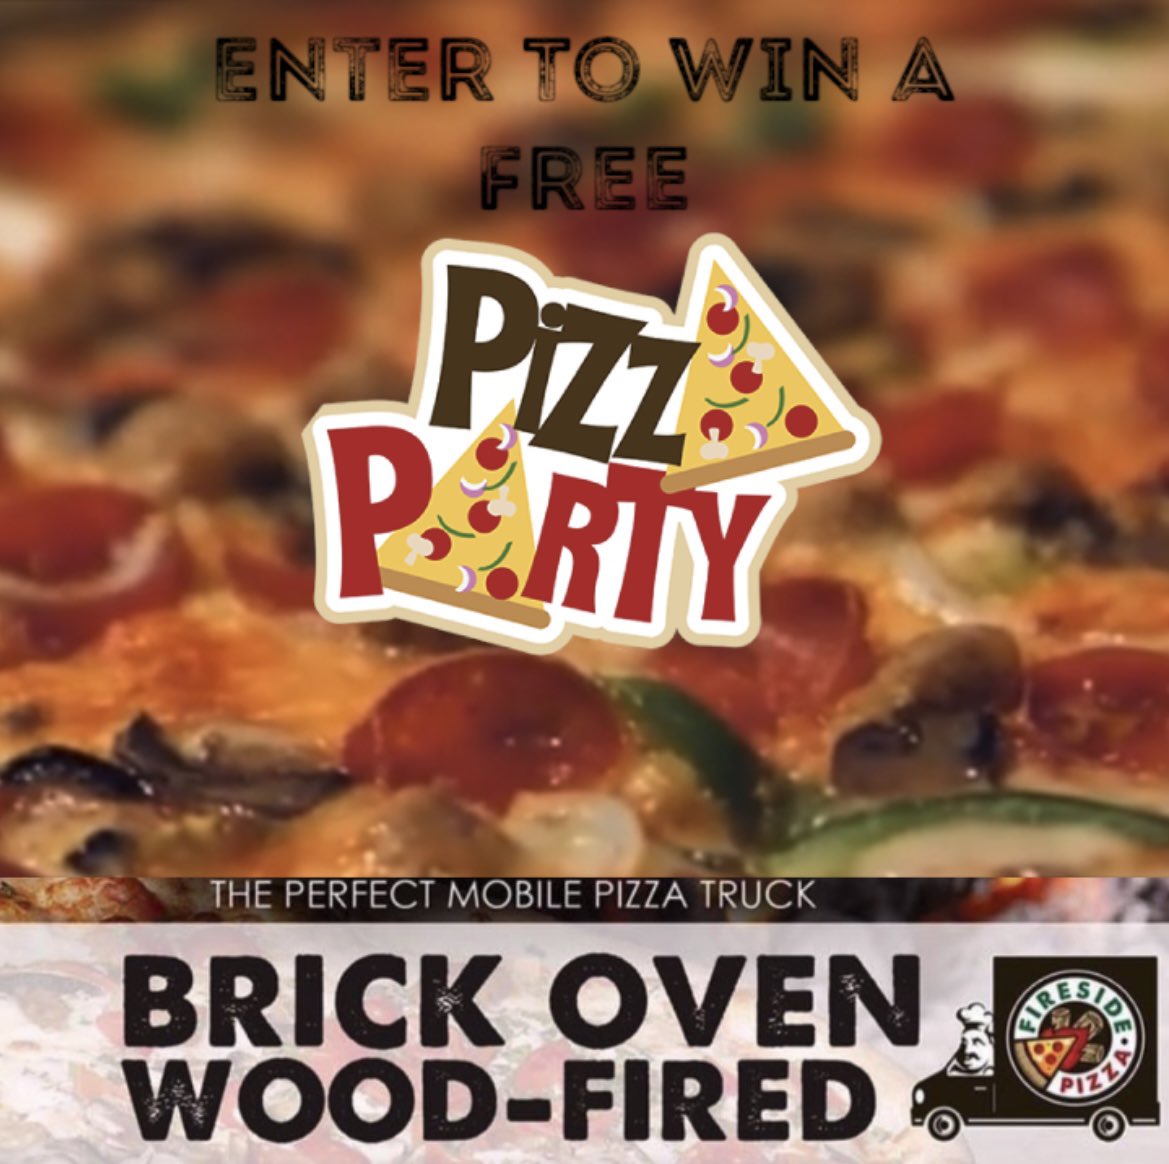 See details on our IG page! @FiresidepizzaMD #pizzagiveaway #woodfirepizza #pizzaparty #mealgiveaway